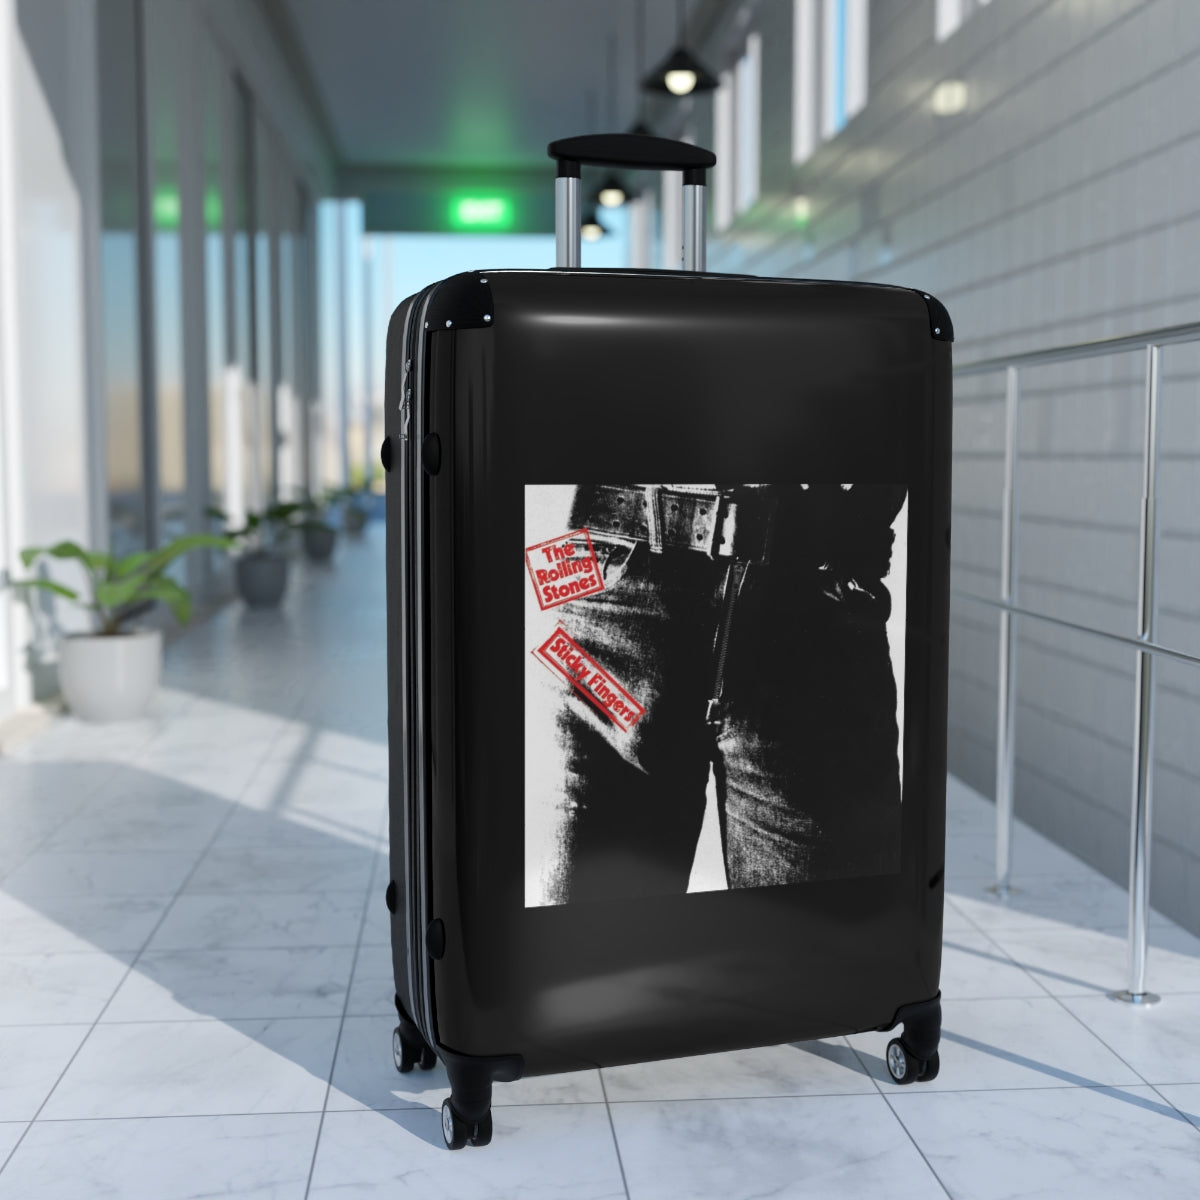 Getrott The Rolling Stones Sticky Fingers 1971 Black Cabin Suitcase Extended Storage Adjustable Telescopic Handle Double wheeled Polycarbonate Hard-shell Built-in Lock-Bags-Geotrott